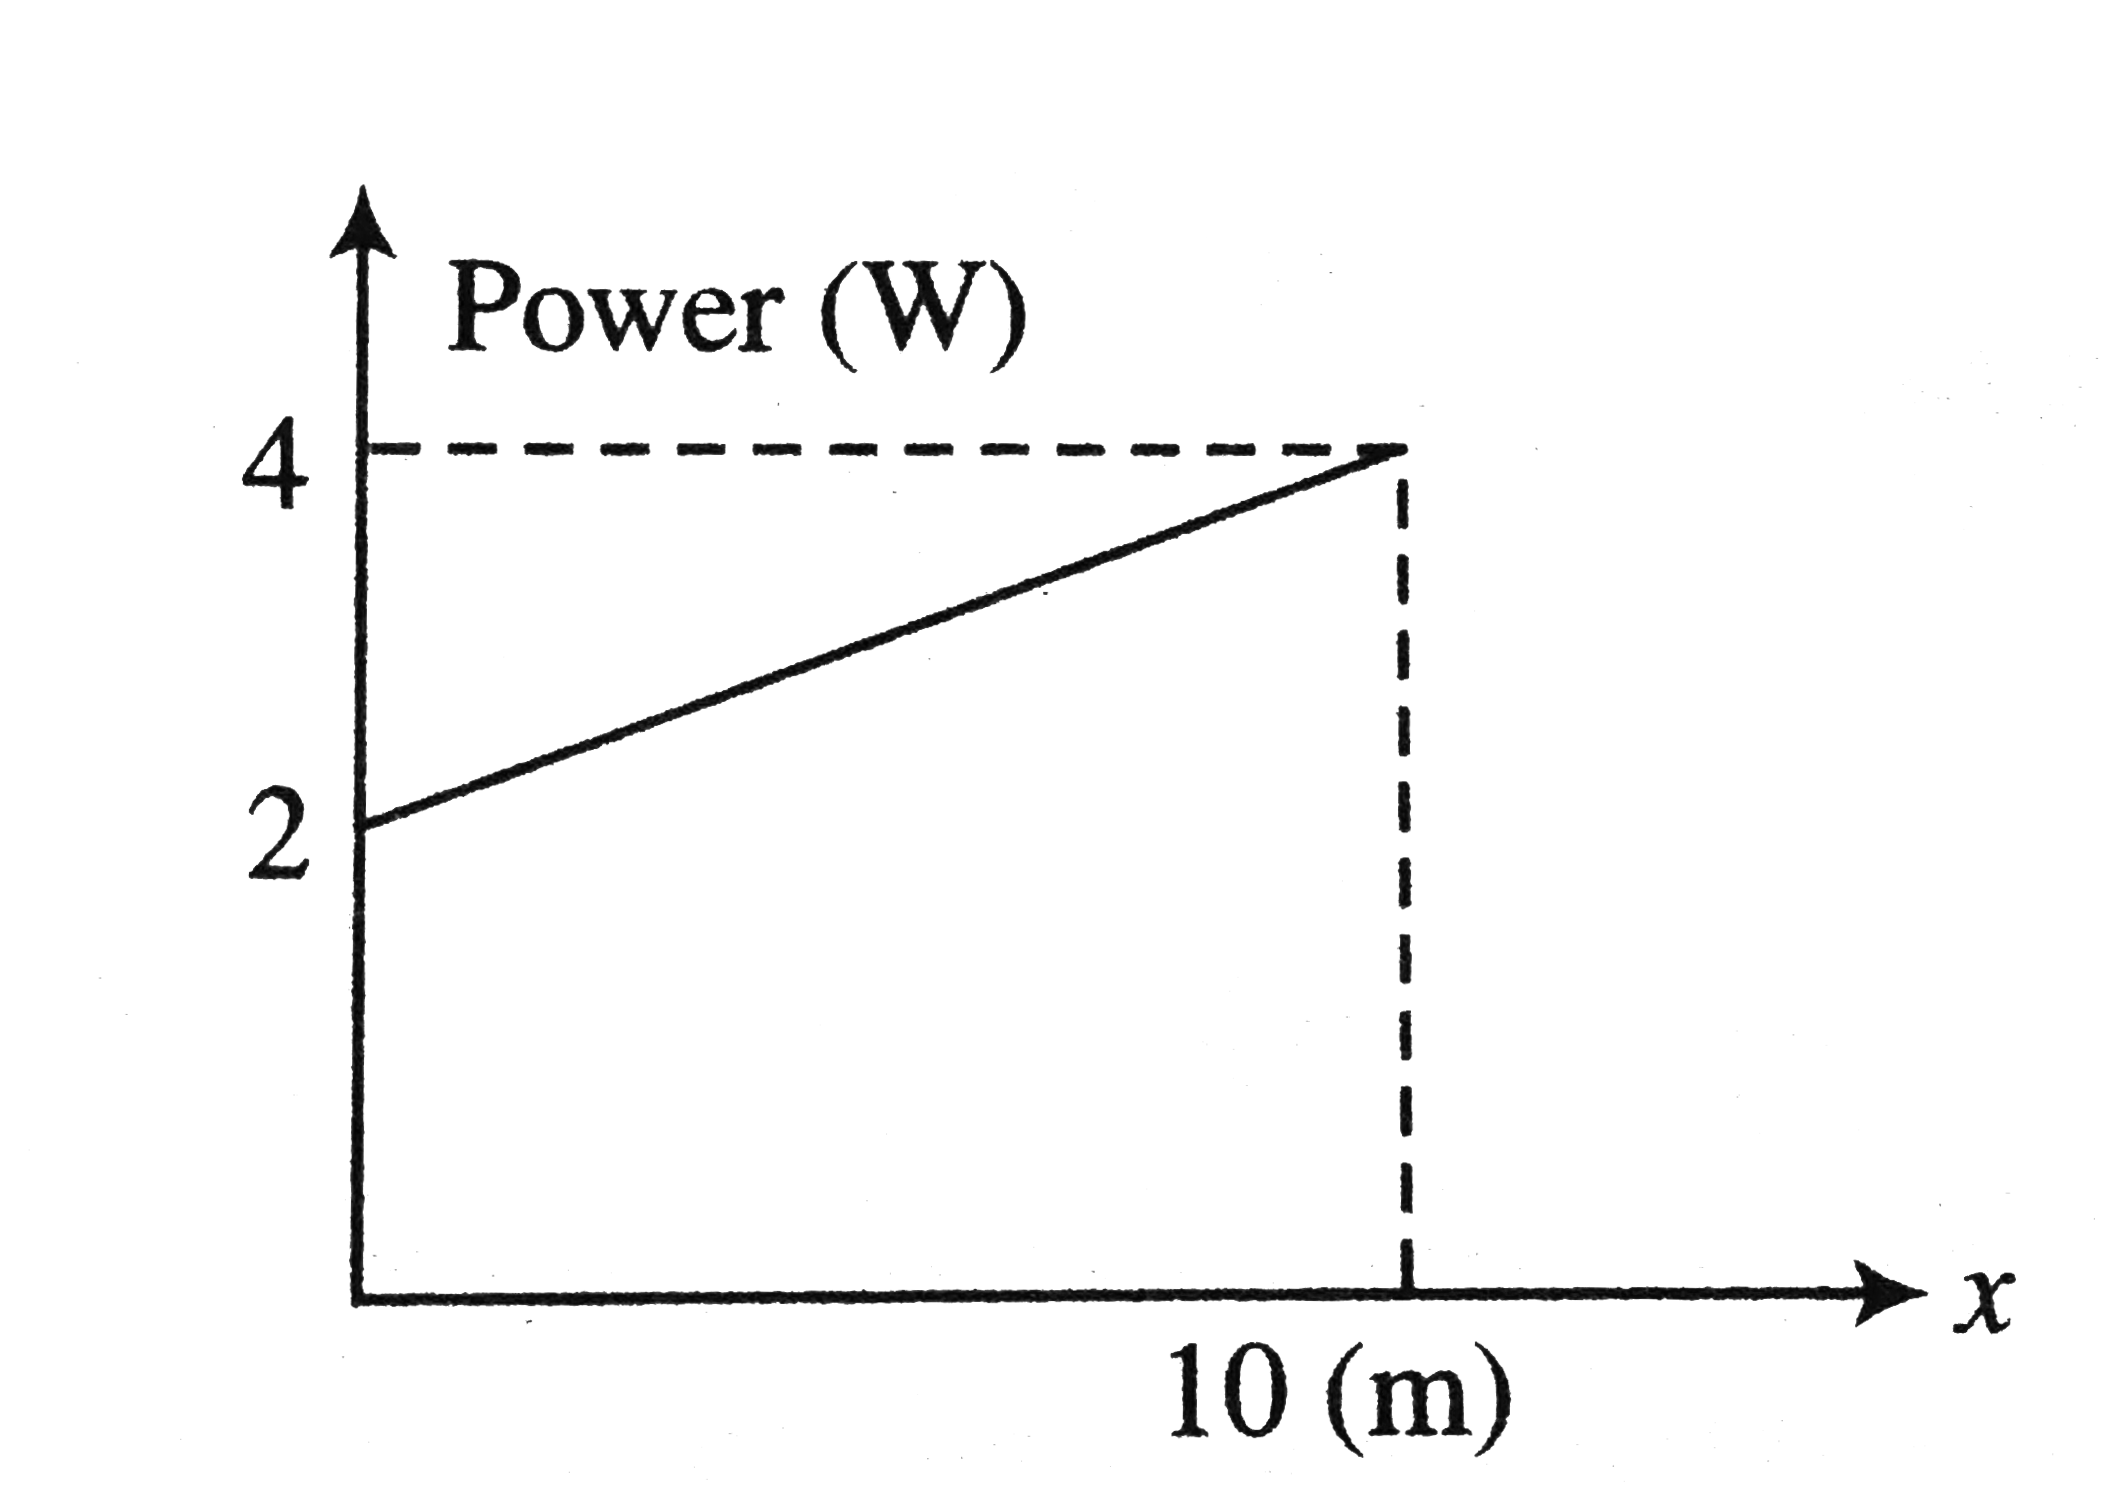 A particle A of mass 10//7kg is moving in the positive direction of x-axis. At initial position x=0, its velocity is 1ms^-1, then its velocity at x=10m is (use the graph given)